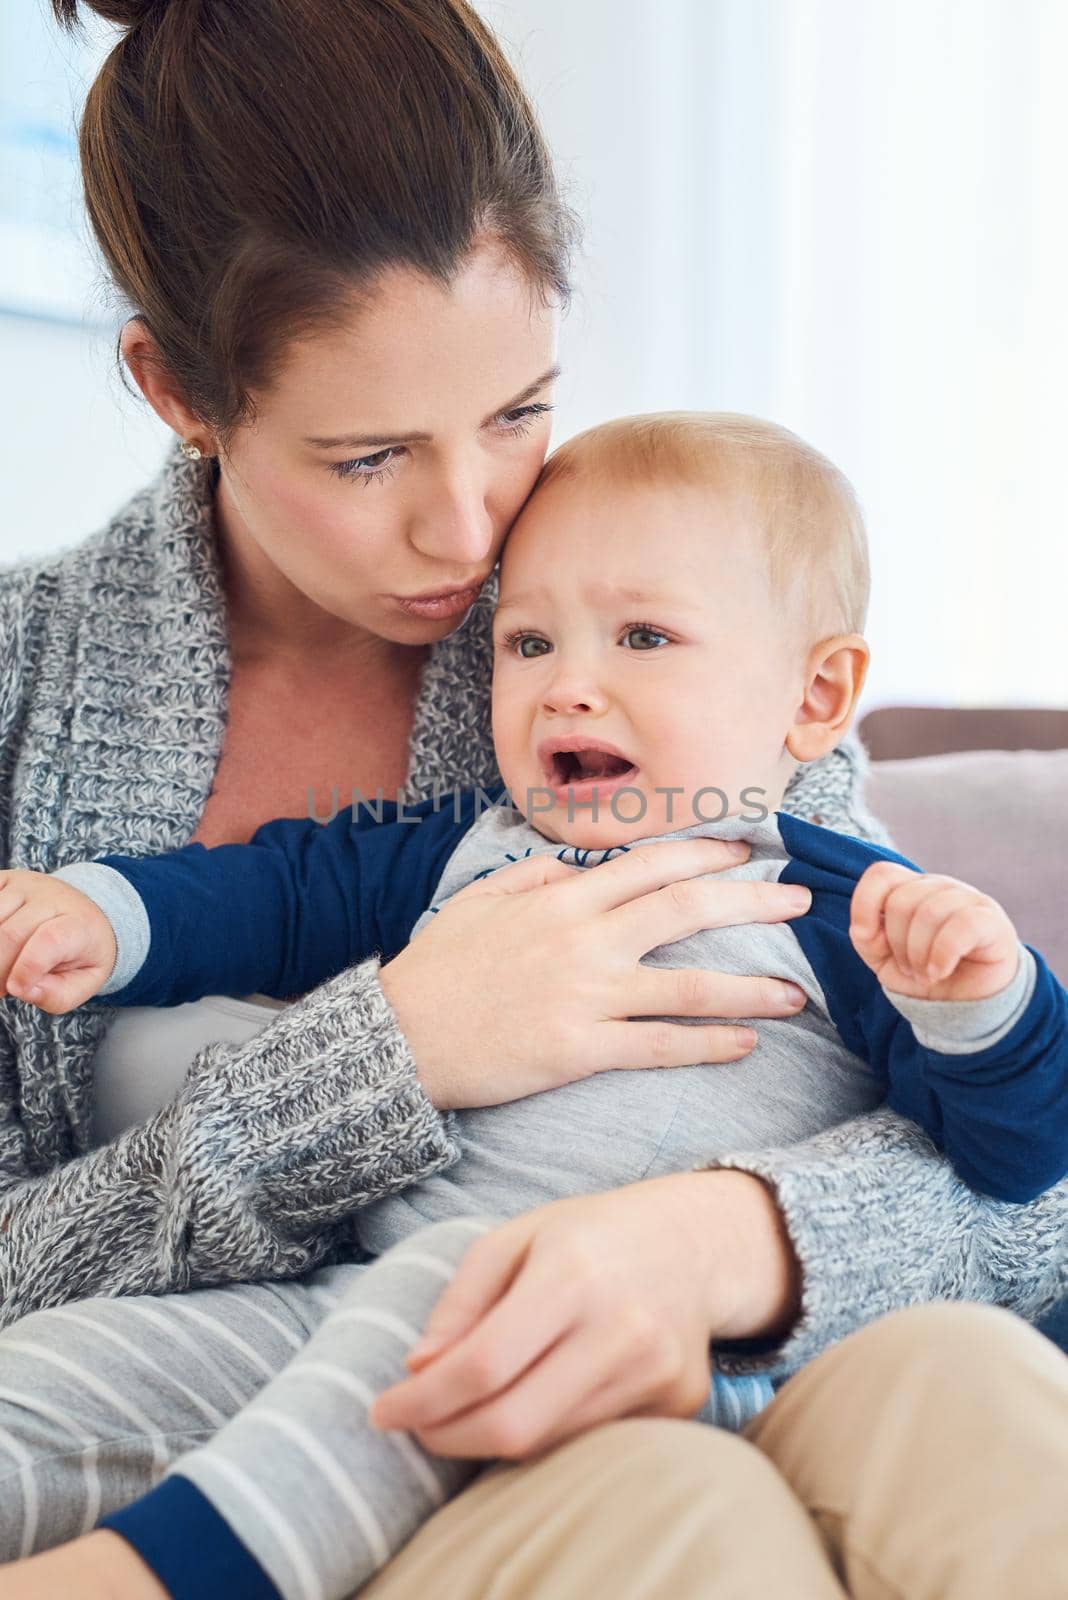 Cropped shot of a mother trying to console her crying baby boy at home.